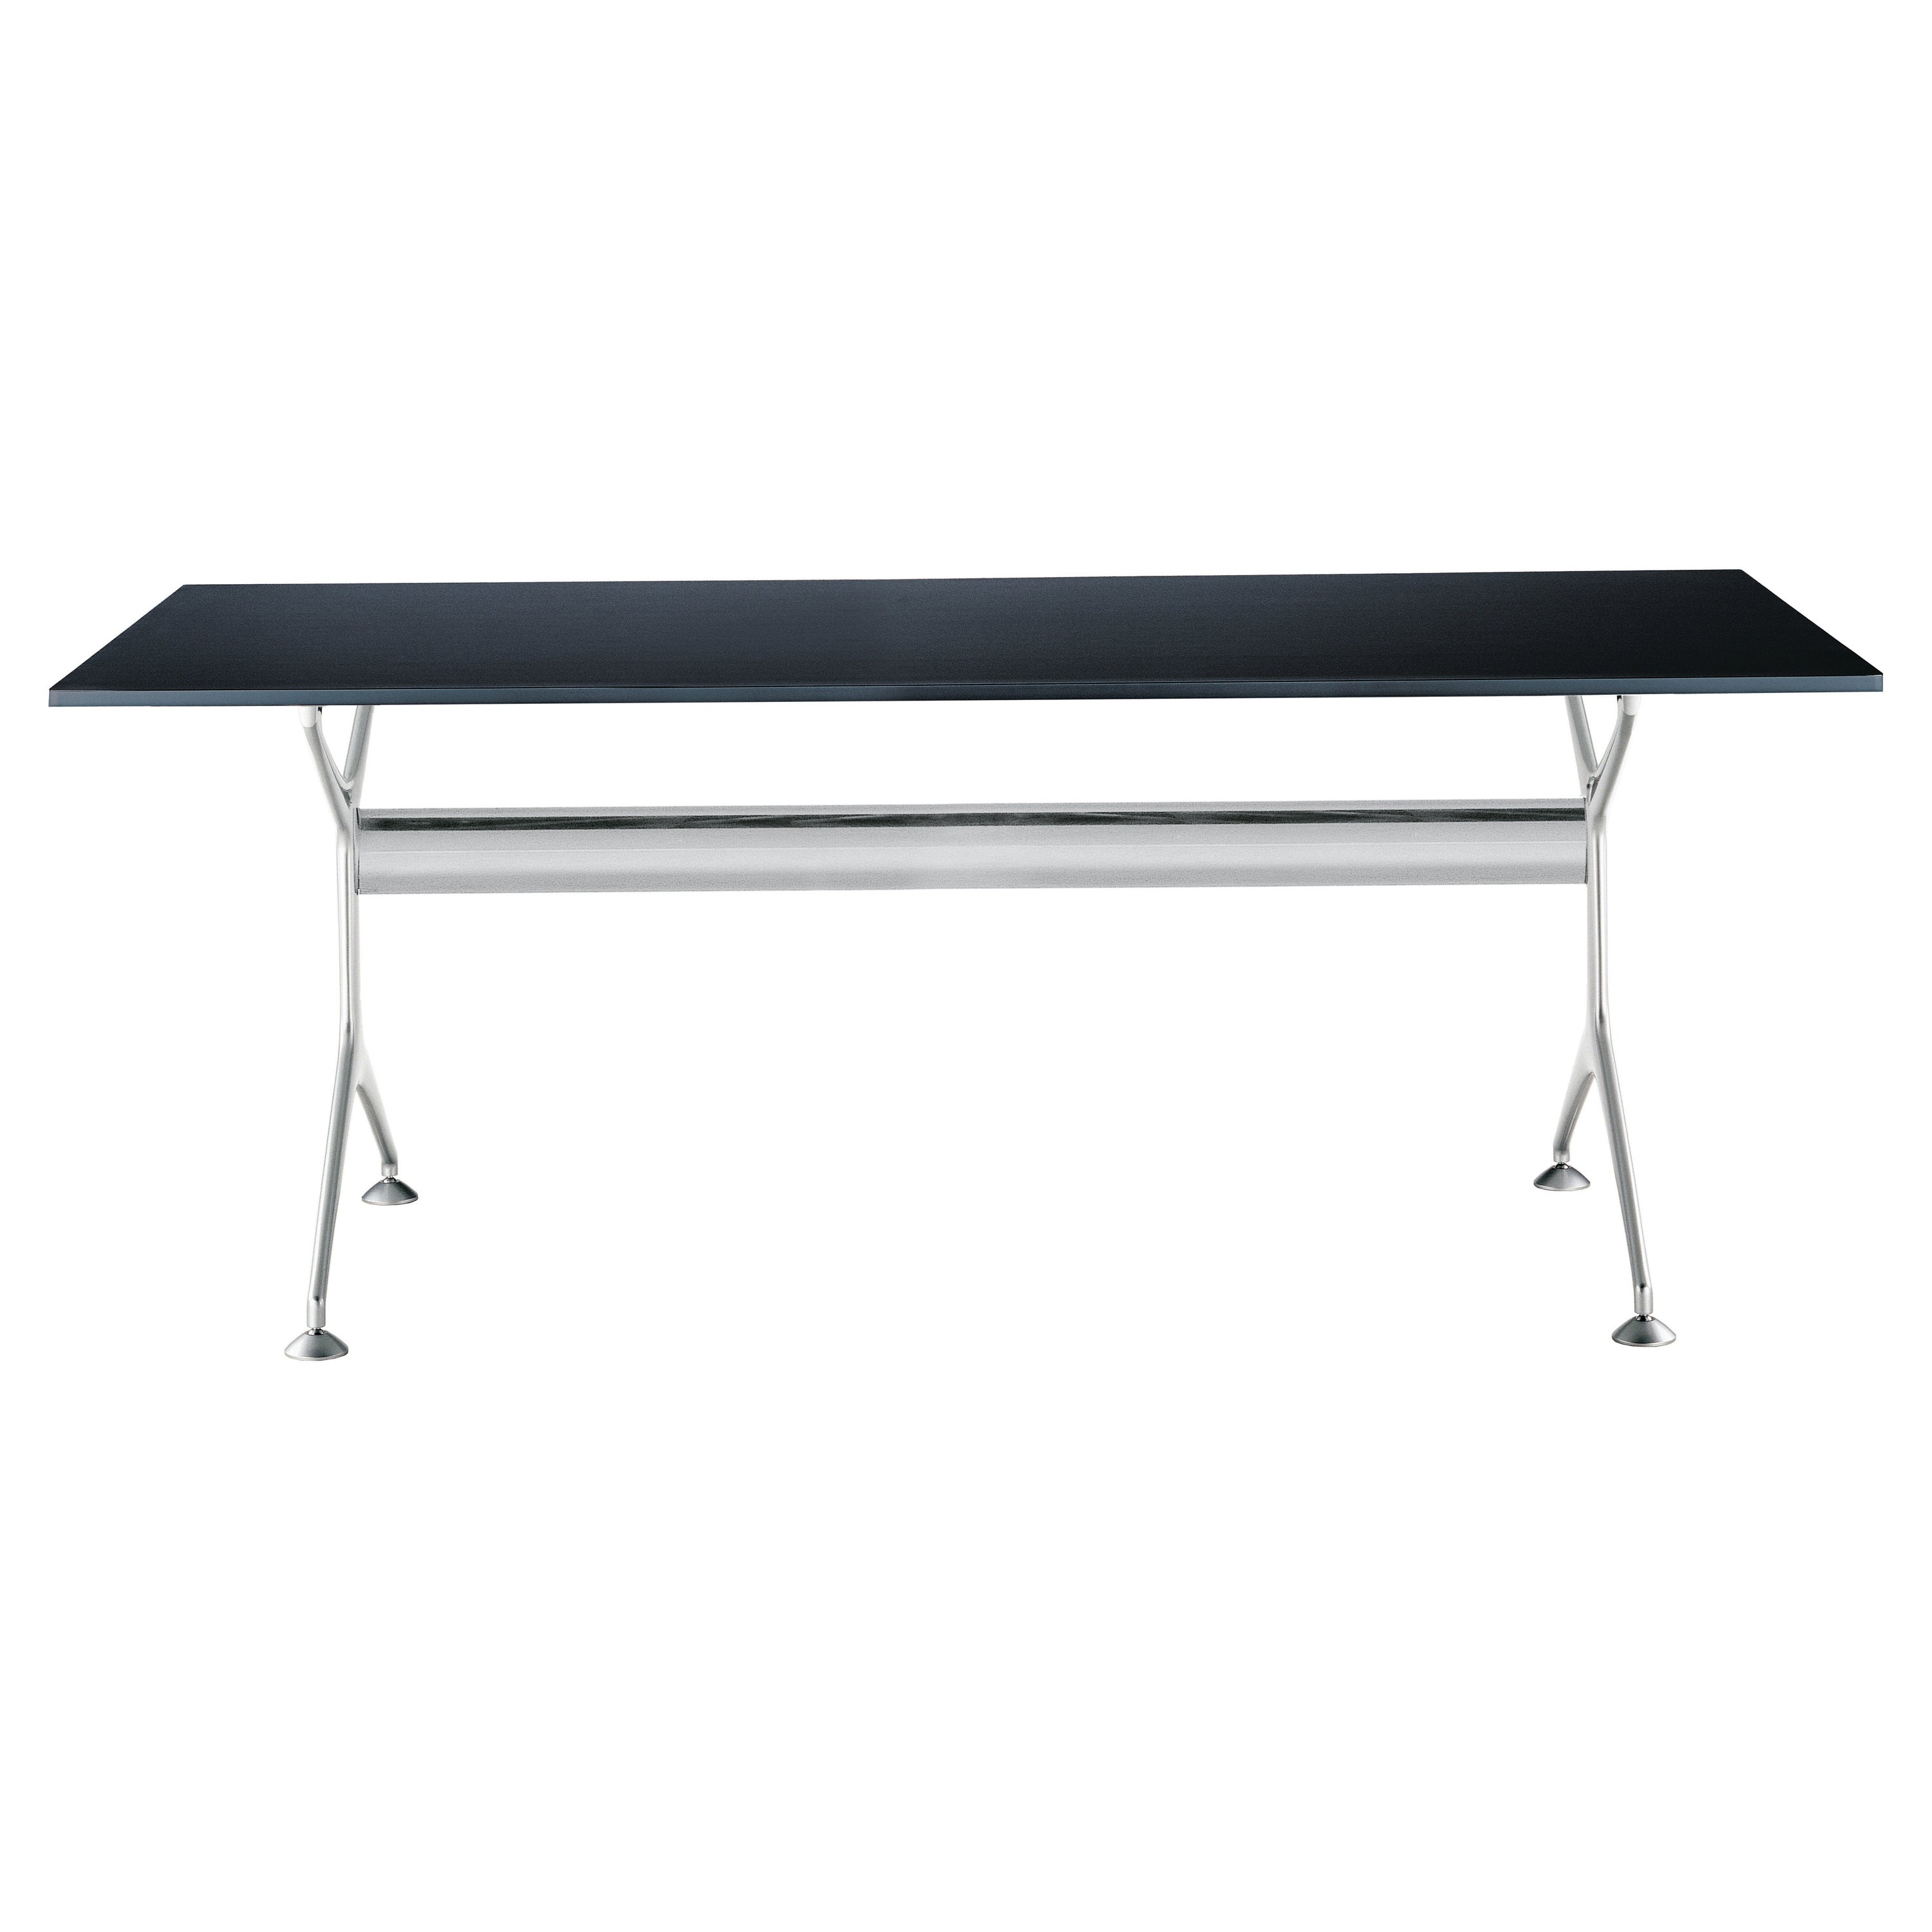 Alias Frametable 190 in Black Top with Polished Aluminium Frame by Alberto Meda For Sale